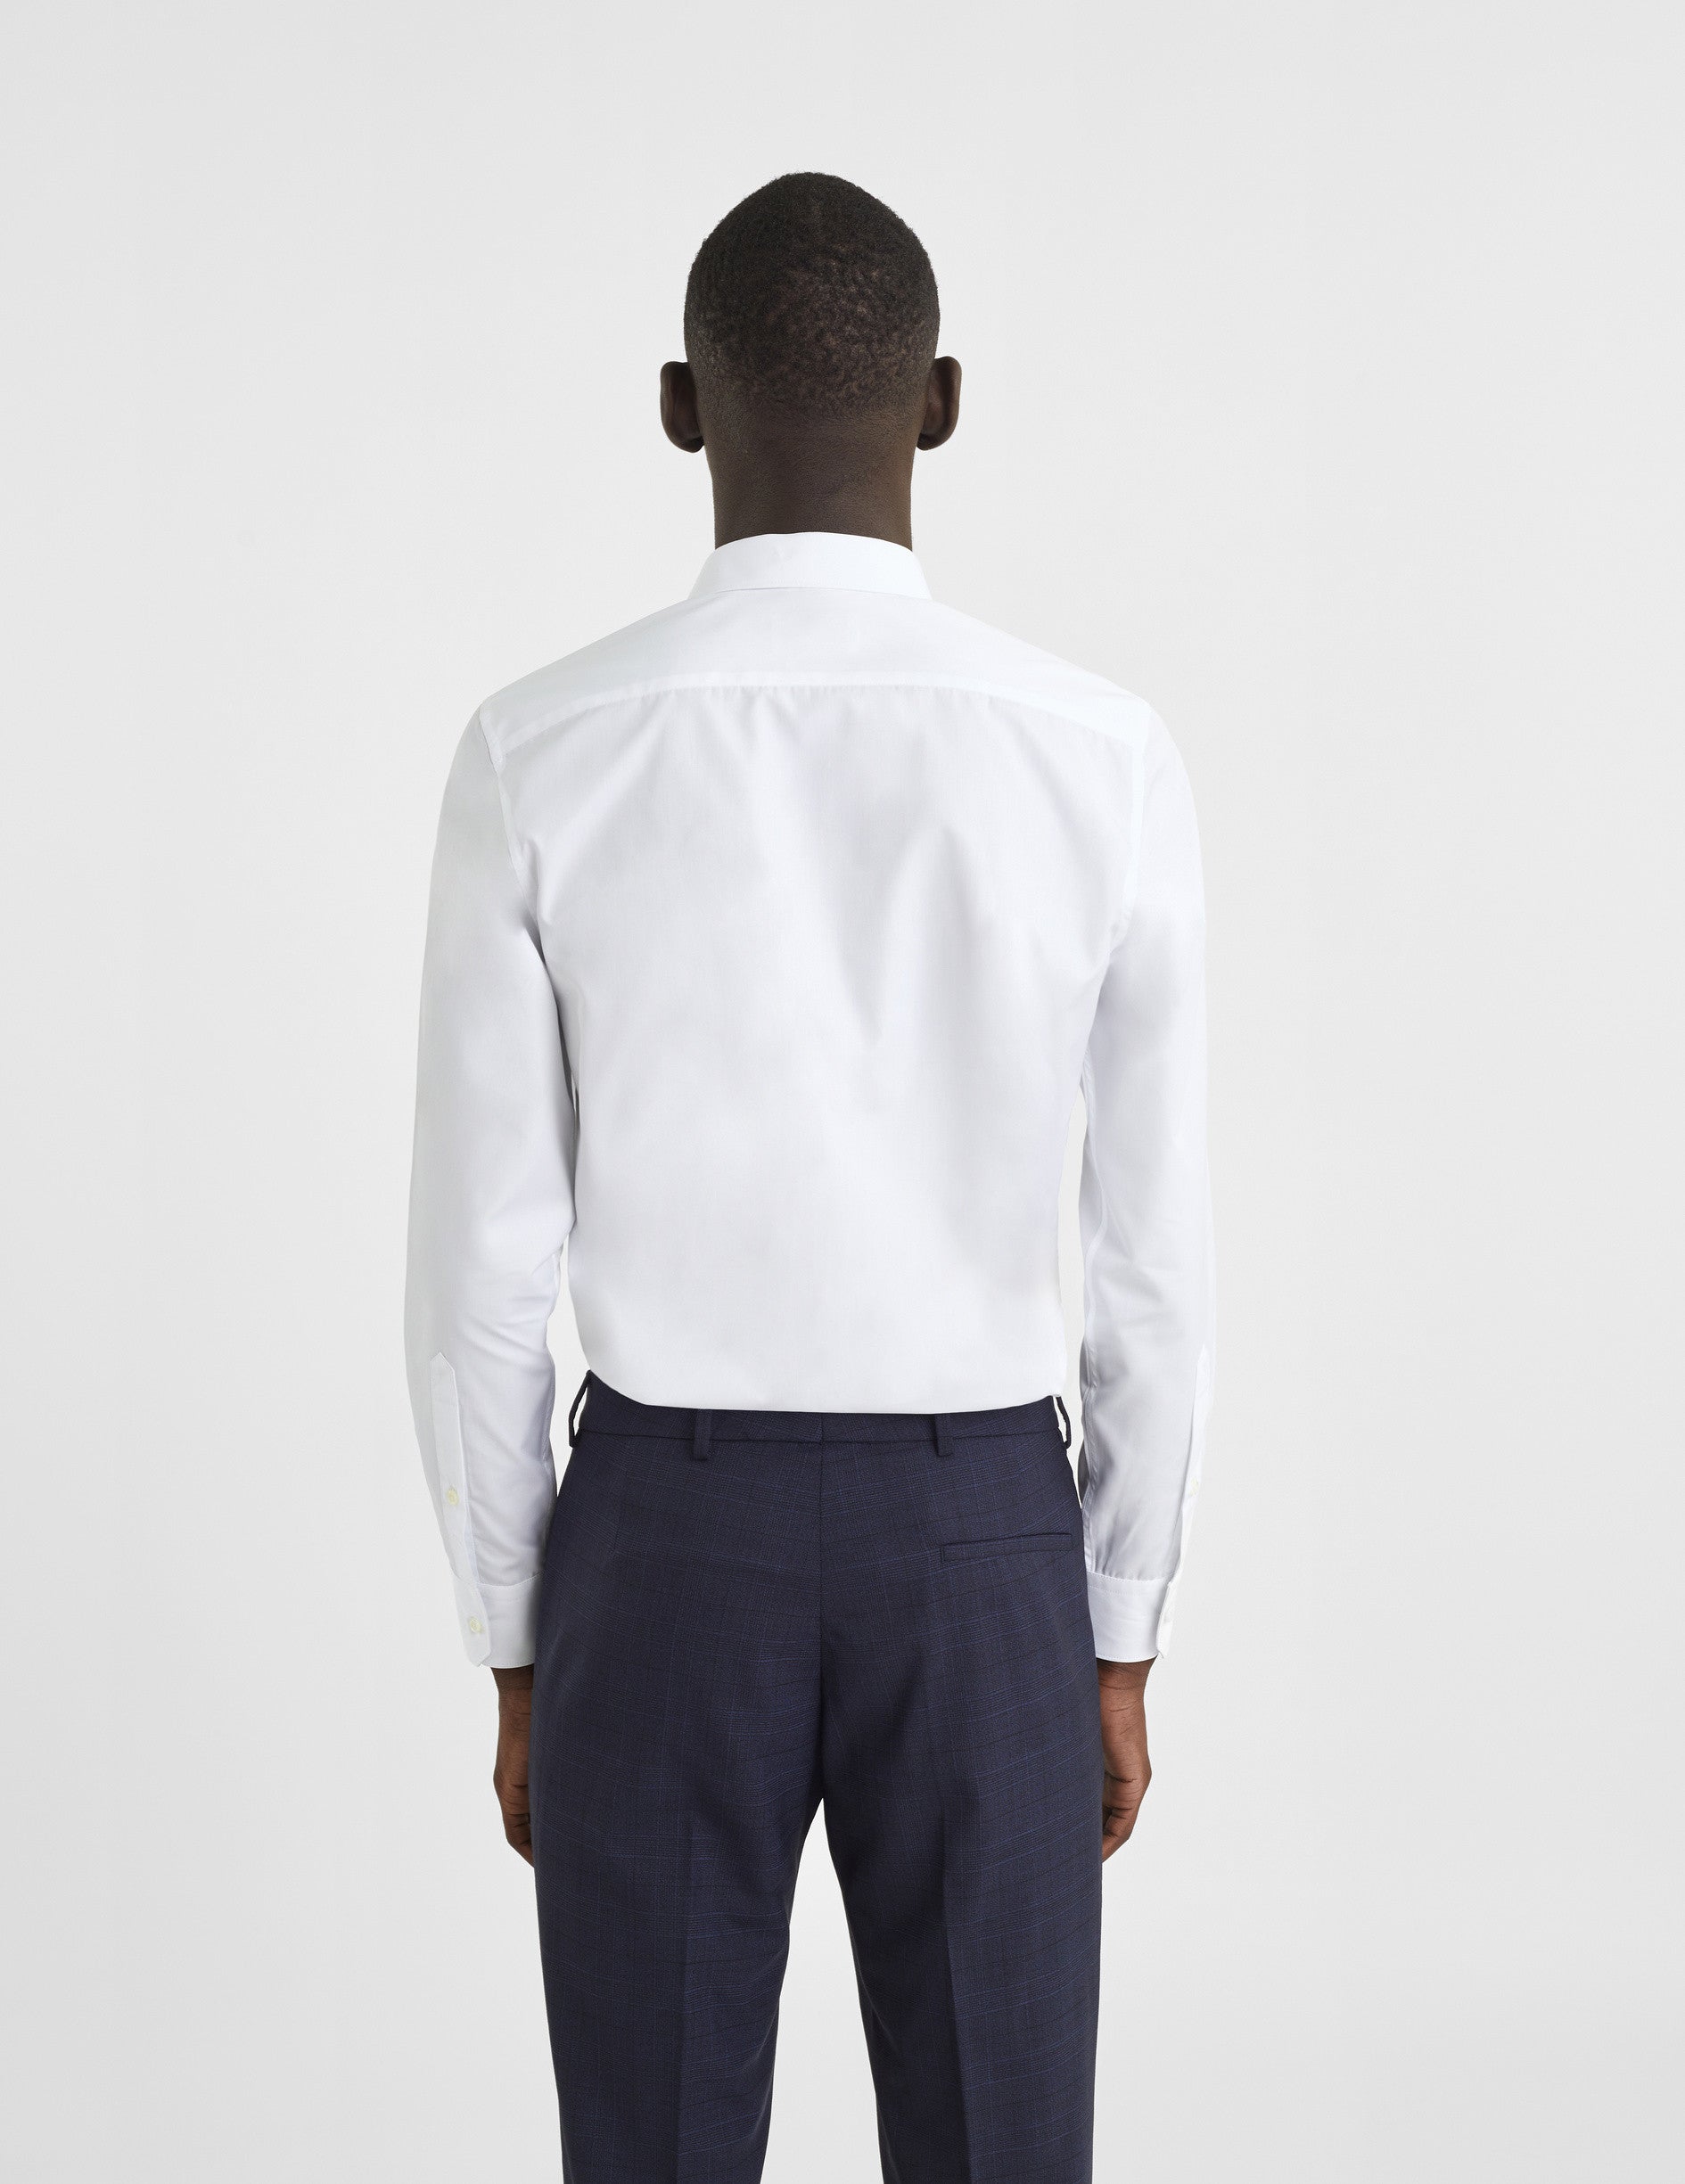 Fitted white shirt - Poplin - Figaret Collar